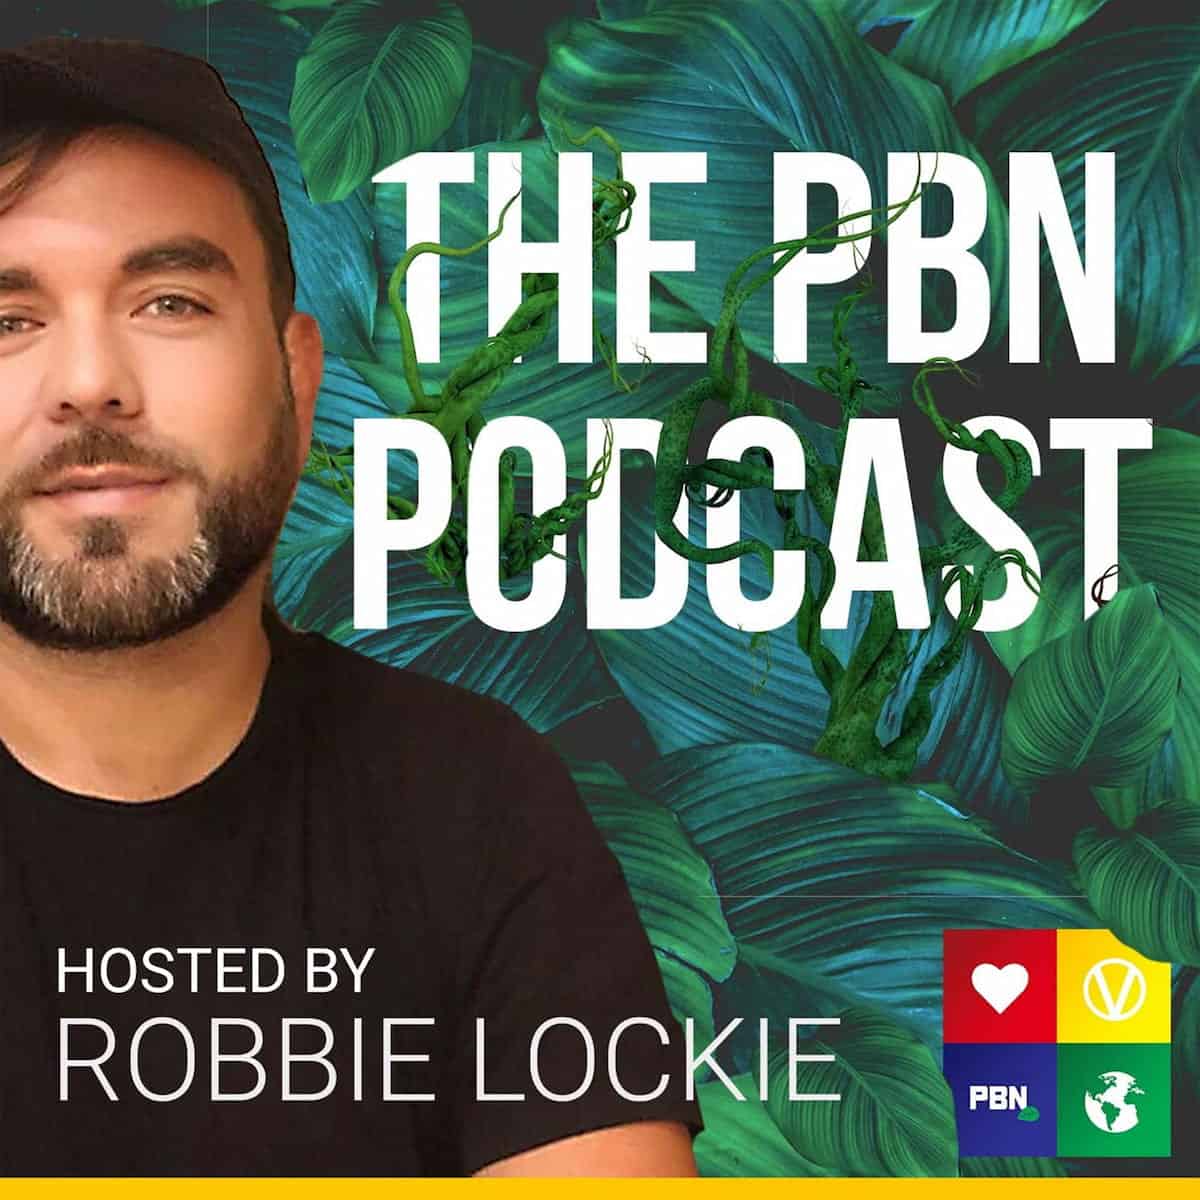 The Plant-Based News Podcast with host Robbie Lockie cover art.